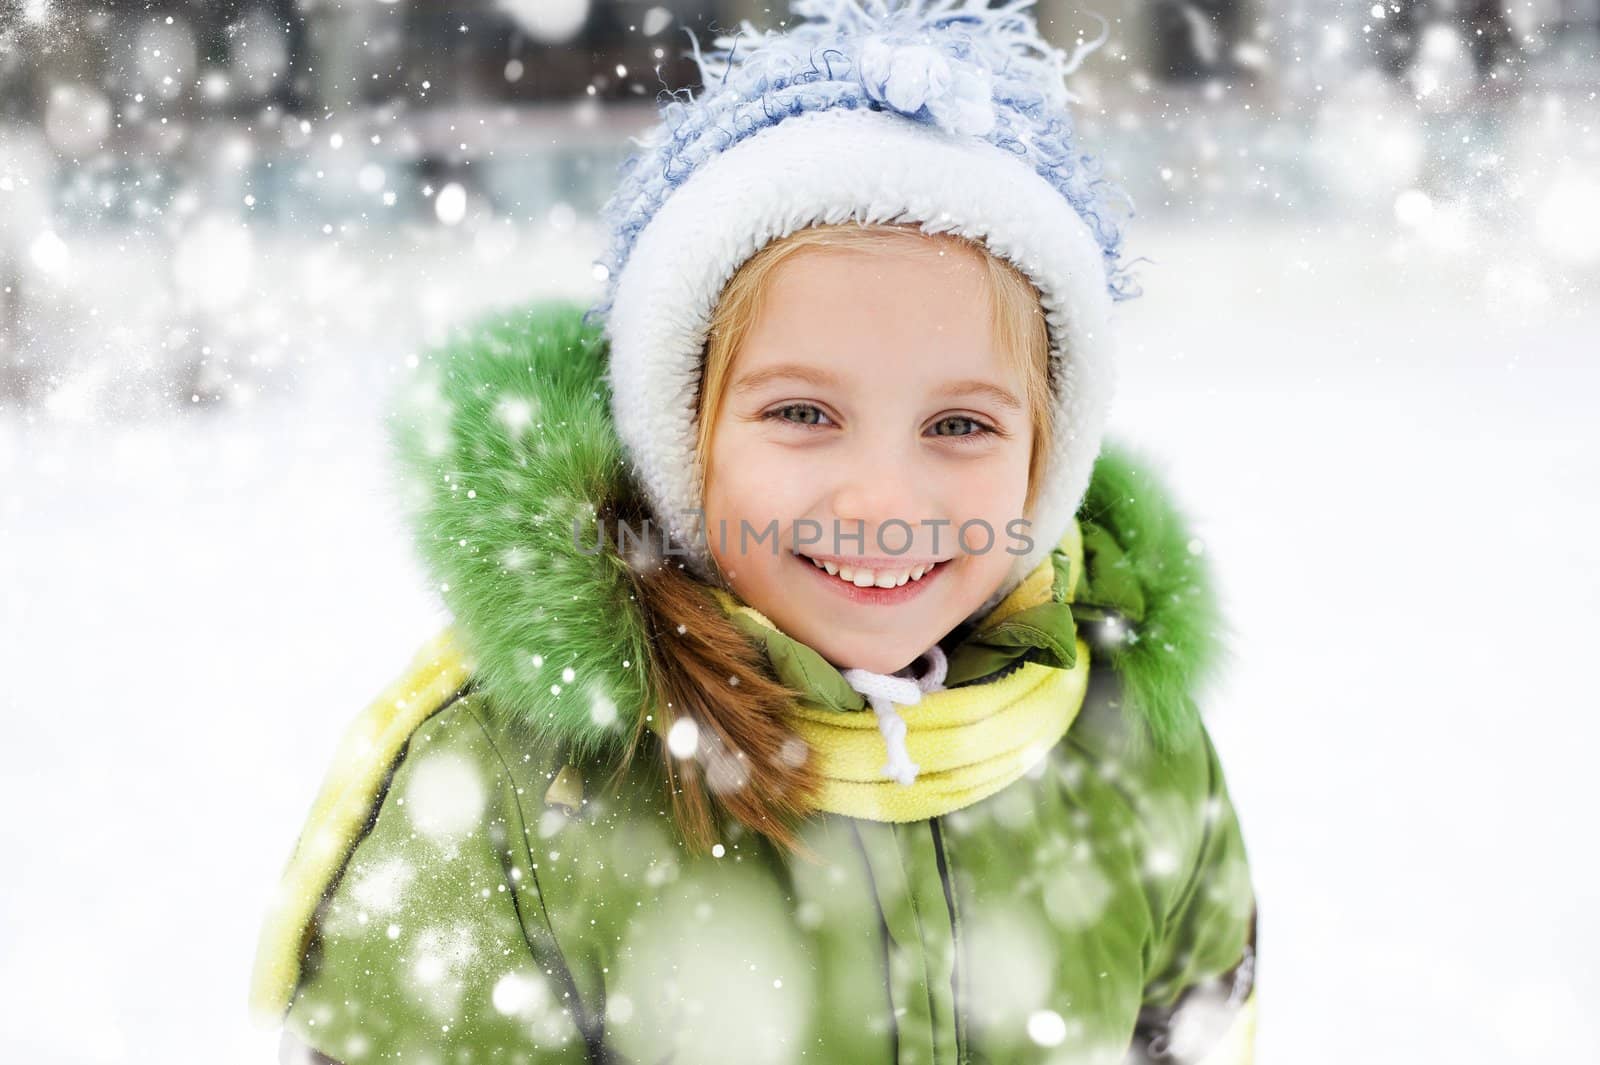 Smiling Happy little girl in winter vacation